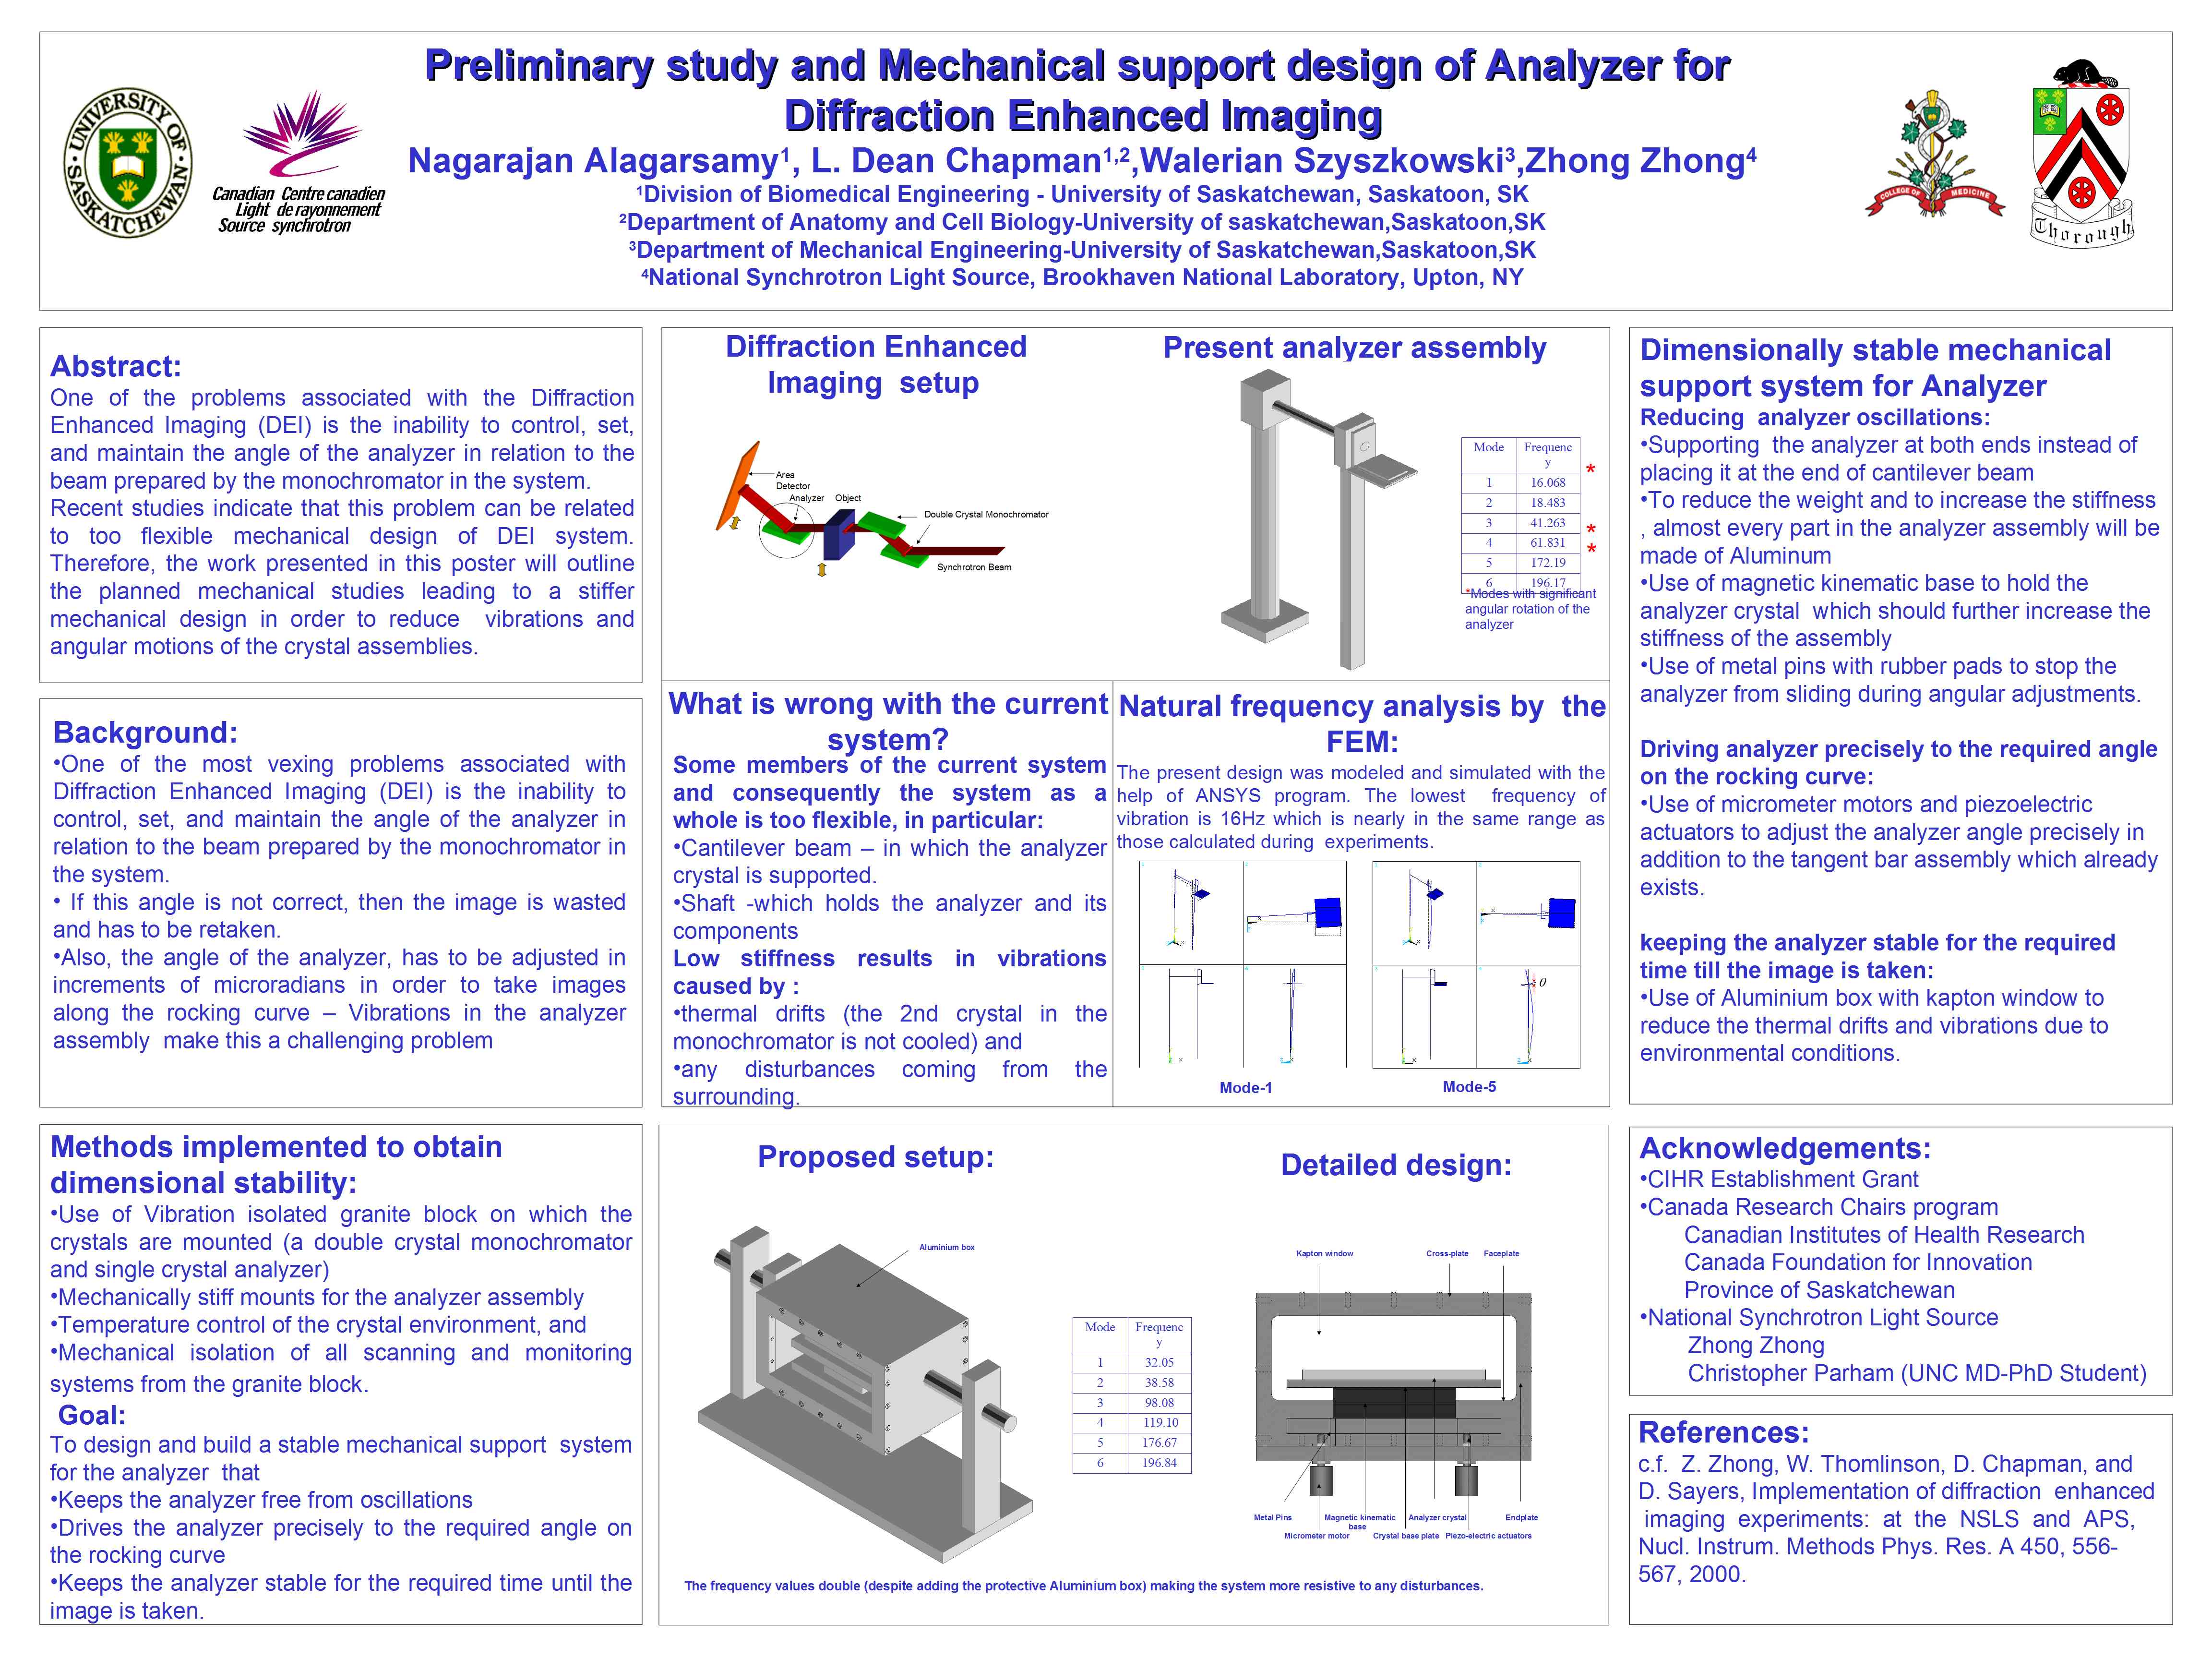 Preliminary study and Mechanical support design of Analyzer for Diffraction Enhanced Imaging Image